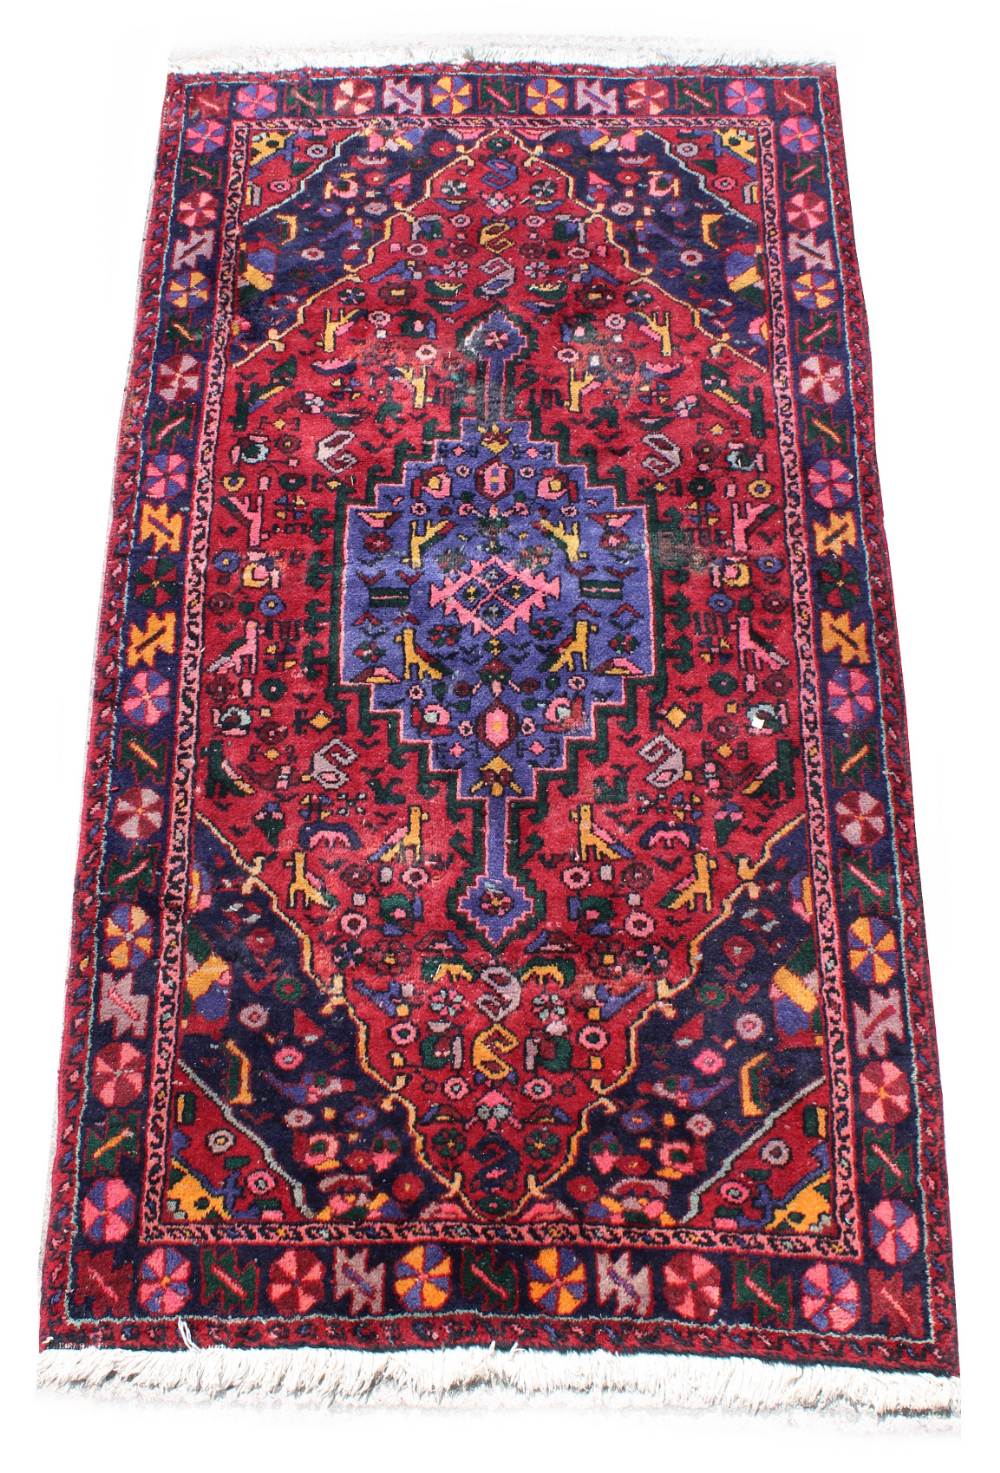 A Hamadan woollen hand-made carpet with blue ground, 97 by 52ins. (245 by 130cms.).